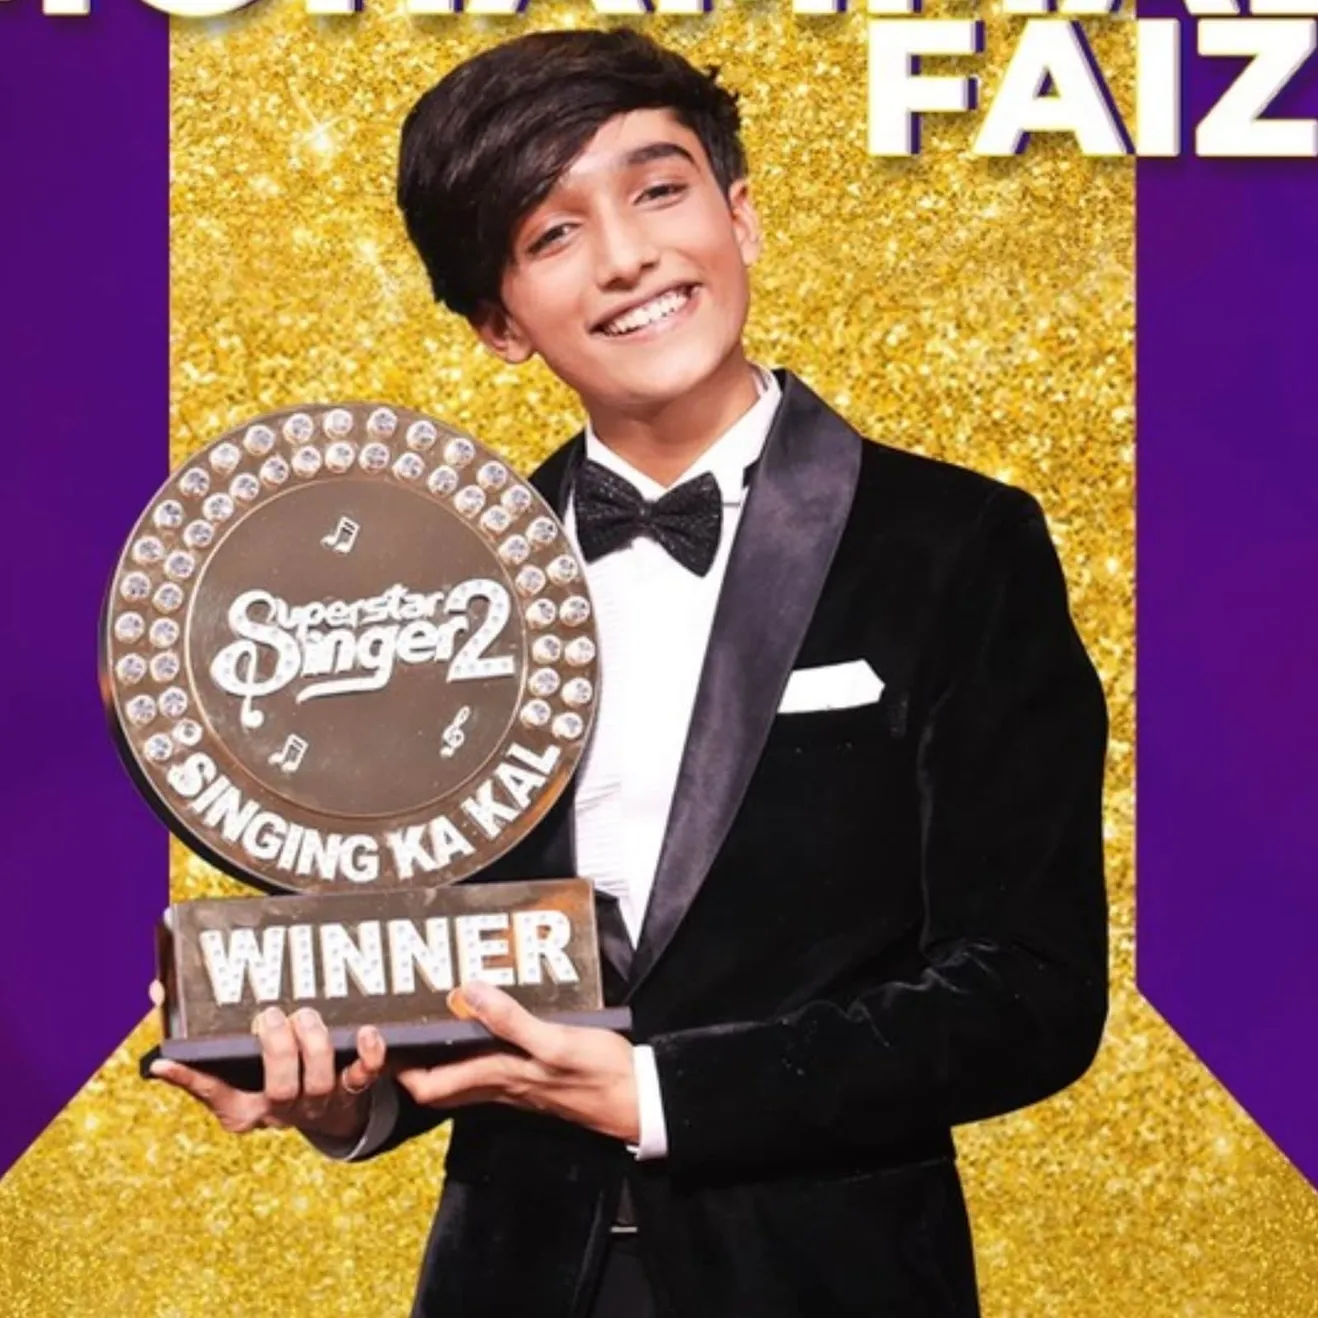 Superstar Singer 2: Mohammad Faiz Wins Show, Says 'Cannot Want To Entertain  World With My Music' - News18